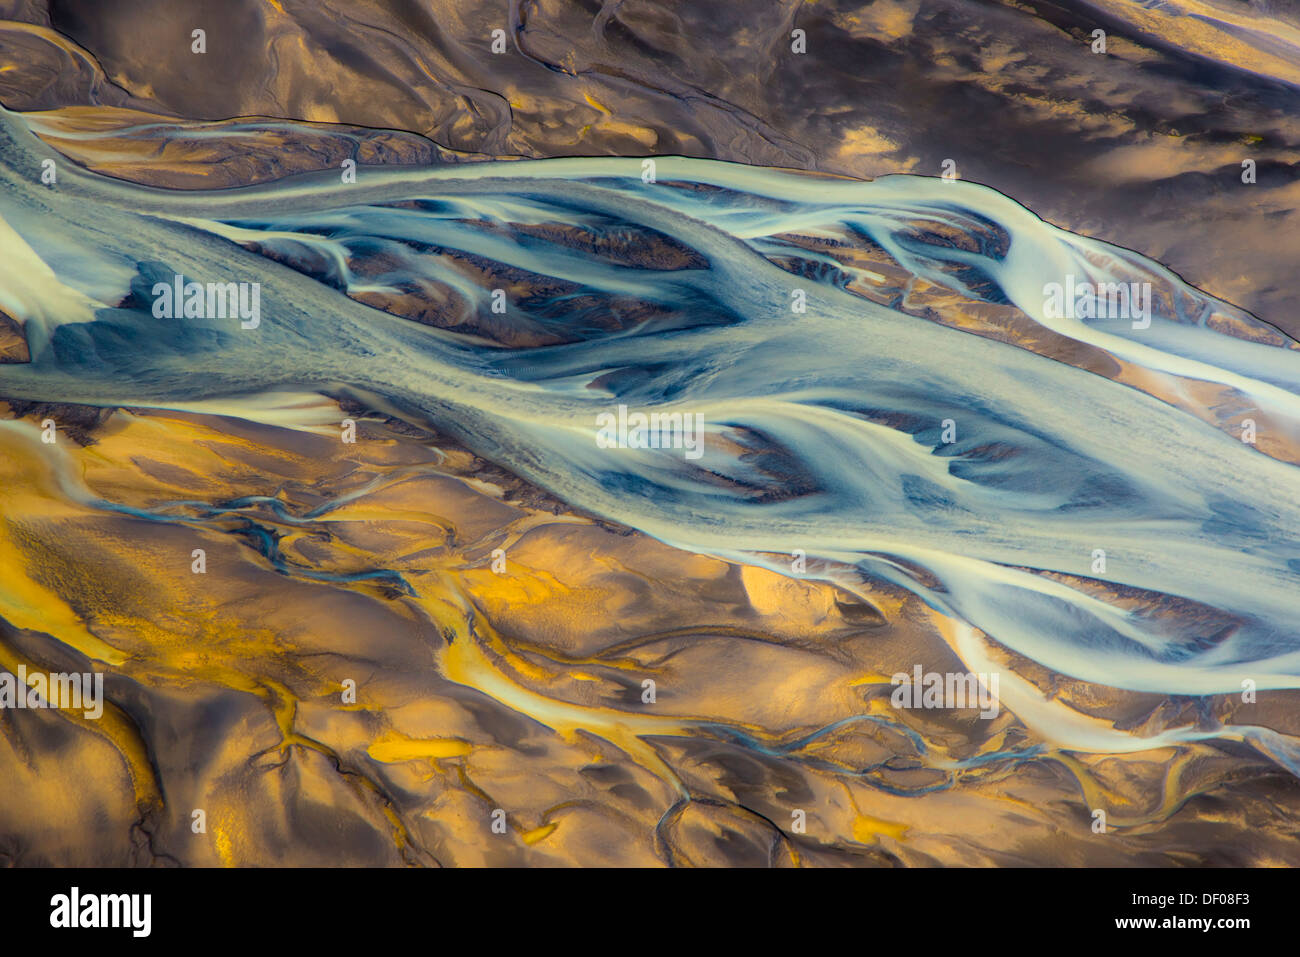 Aerial view, braided structure of the Tungnaá River, Icelandic Highlands, Iceland, Europe Stock Photo